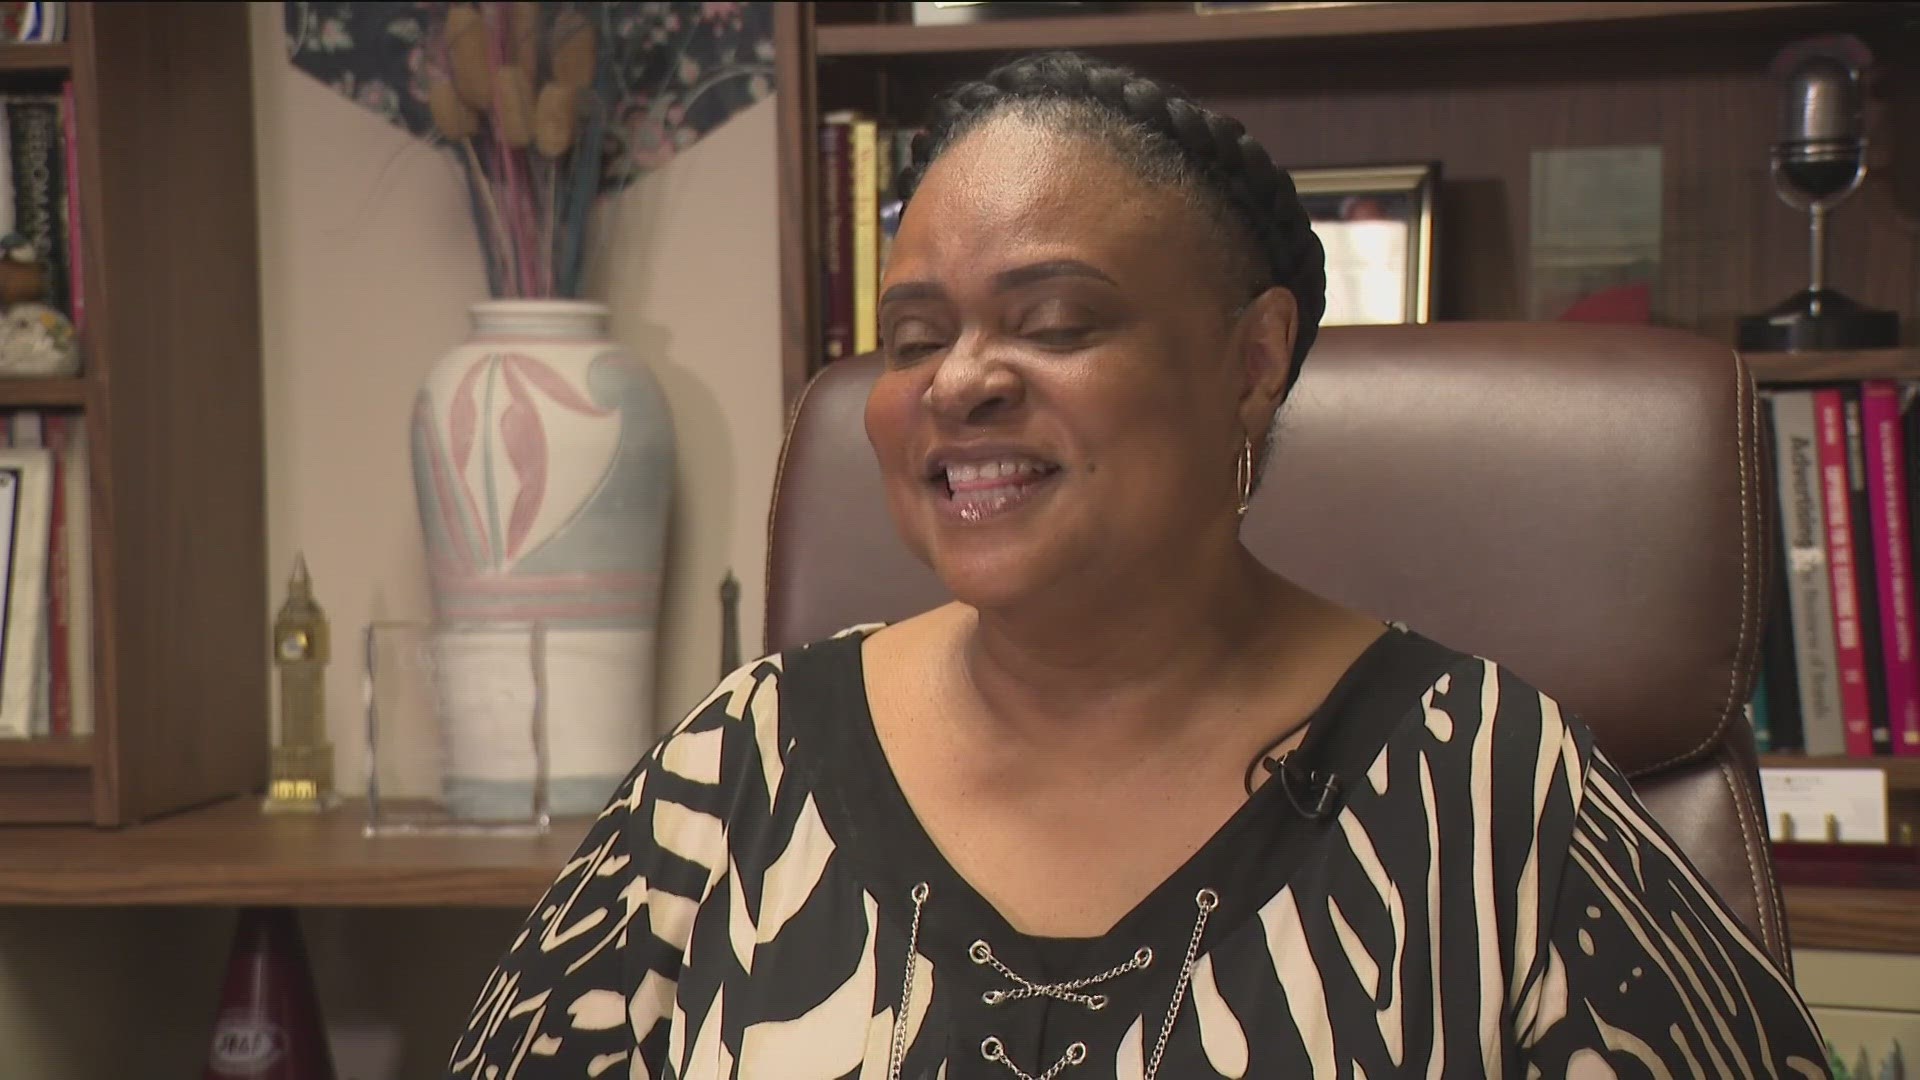 Dr. Laurie Fluker is one of the first Black professors at Texas State University. KVUE's Daranesha Herron has more about her achievements and hurdles.